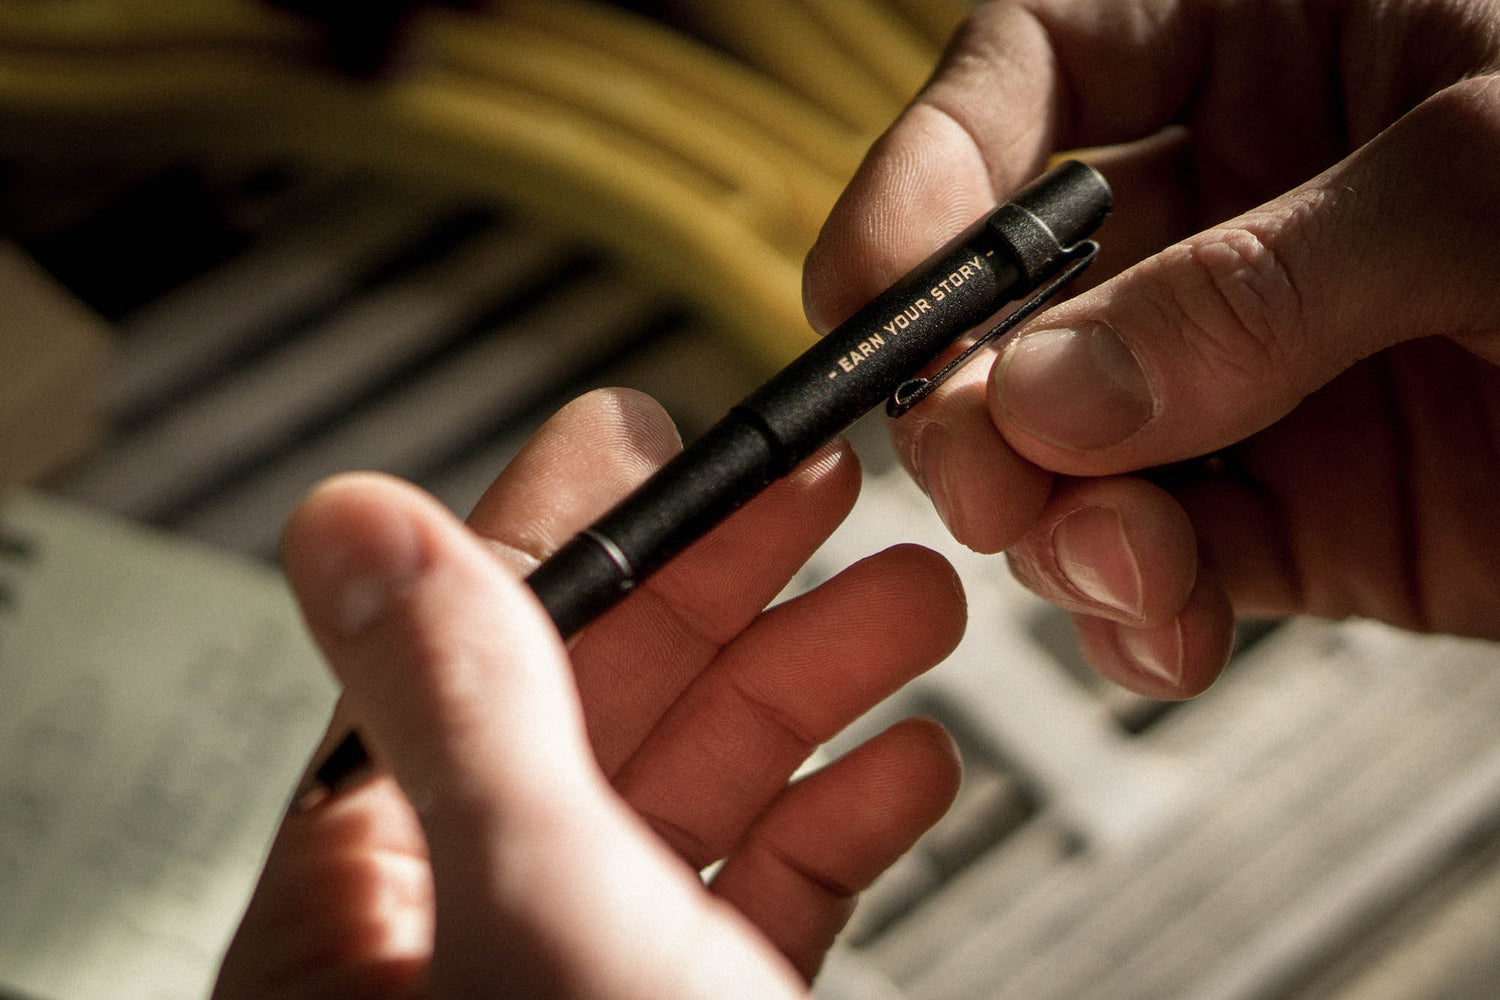 The Best Pens That Write On Any Surface